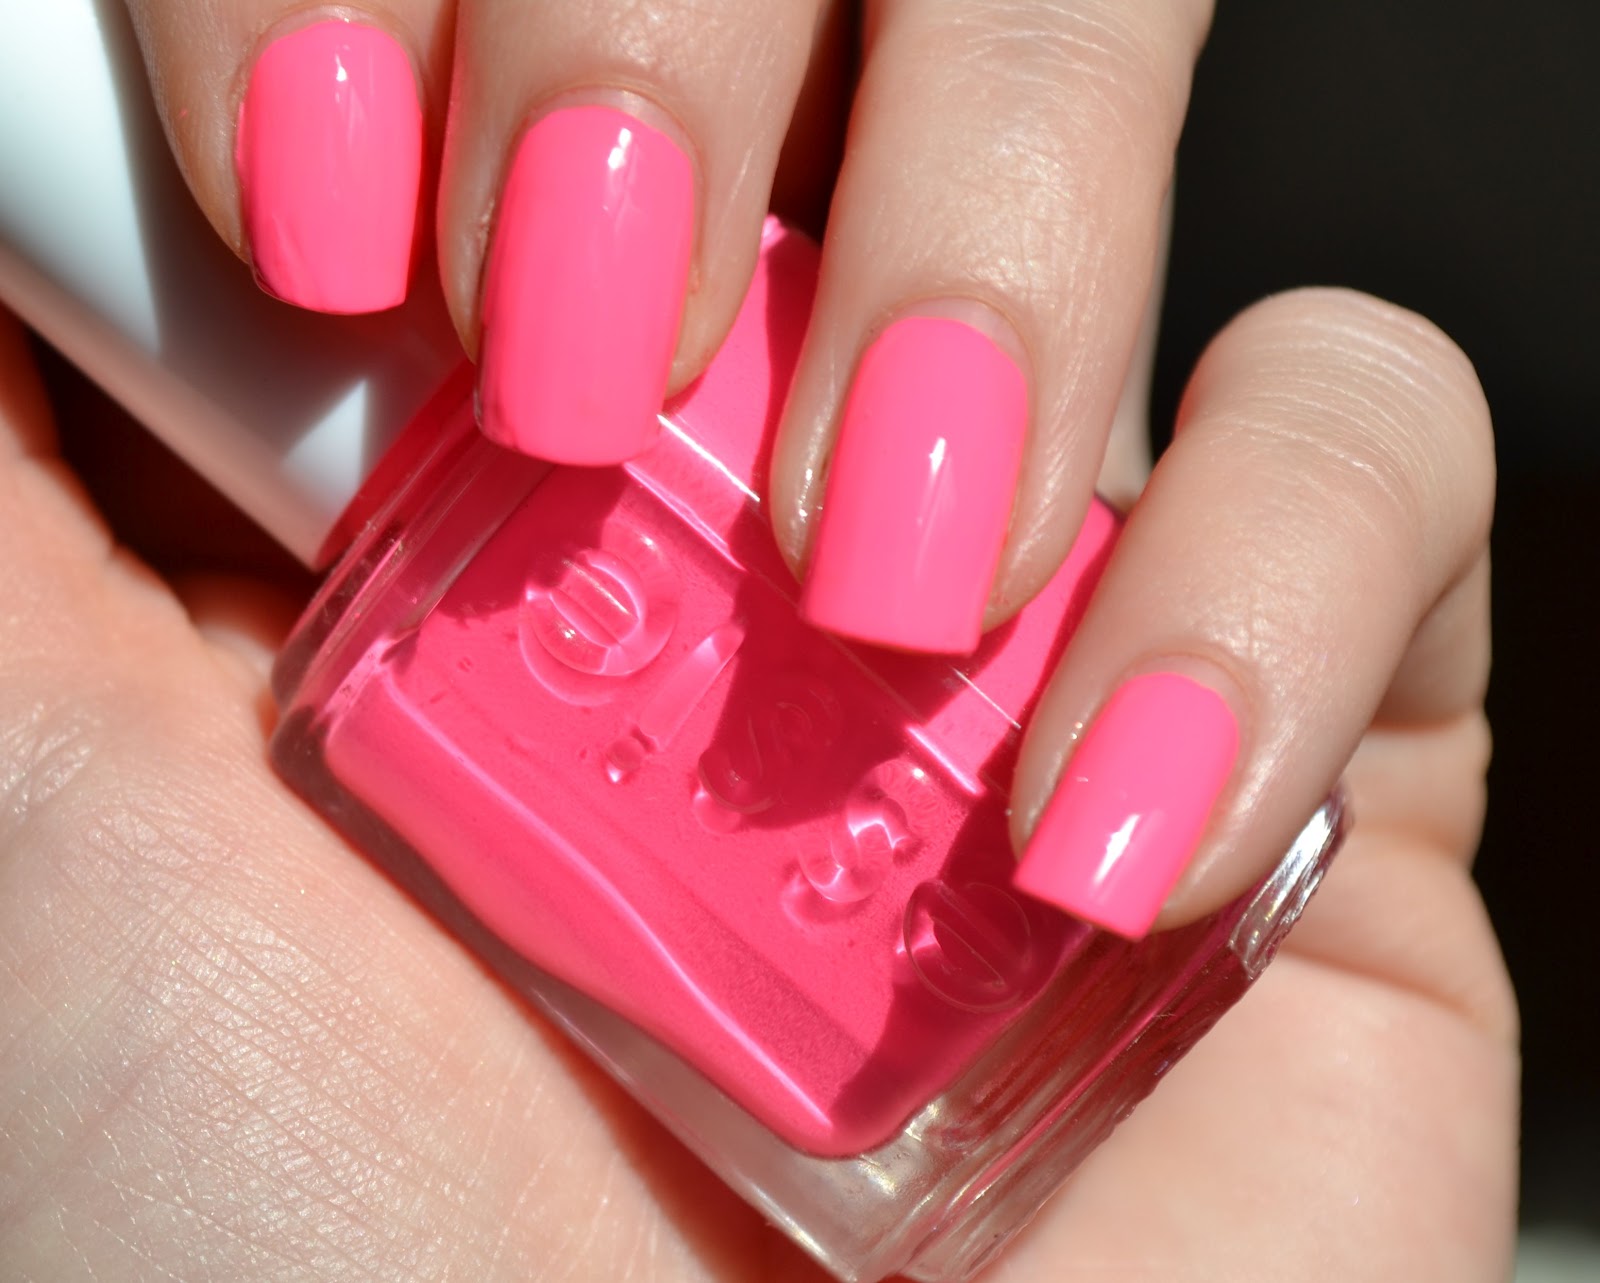 What a Girl's Nail Polish Color Tells About Her